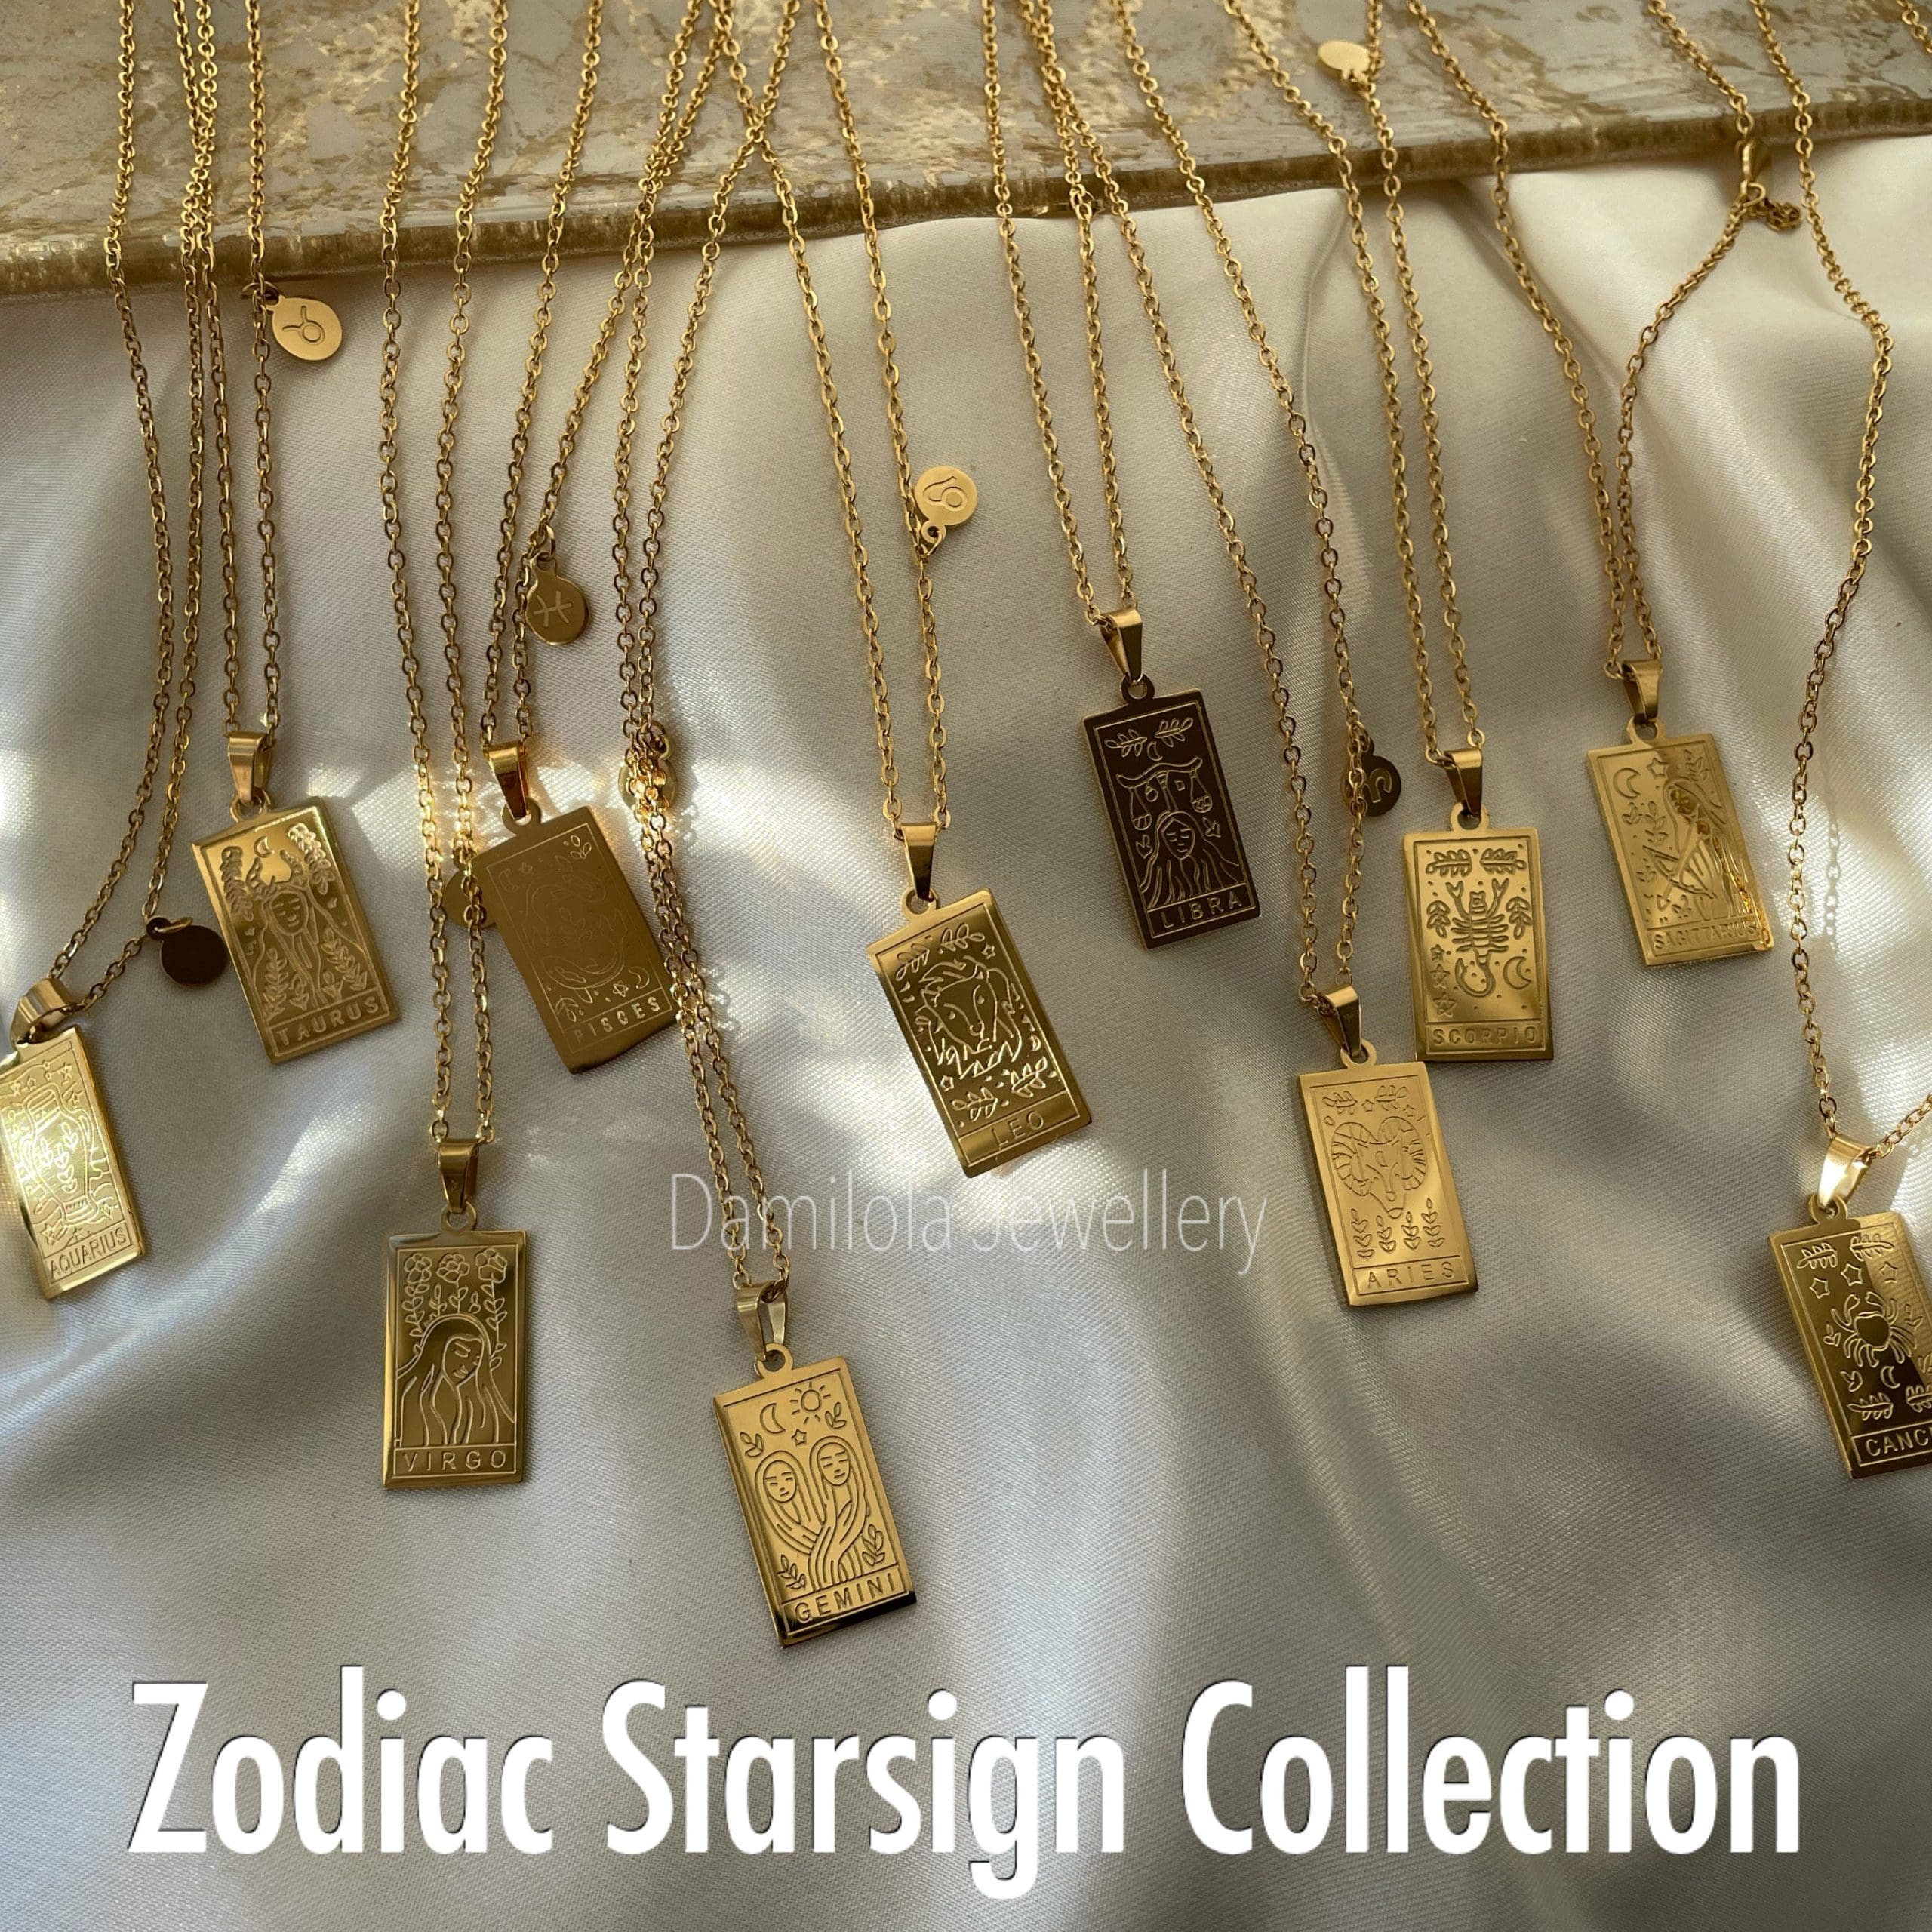 Zodiac Star Signs Necklace - Gold/Silver